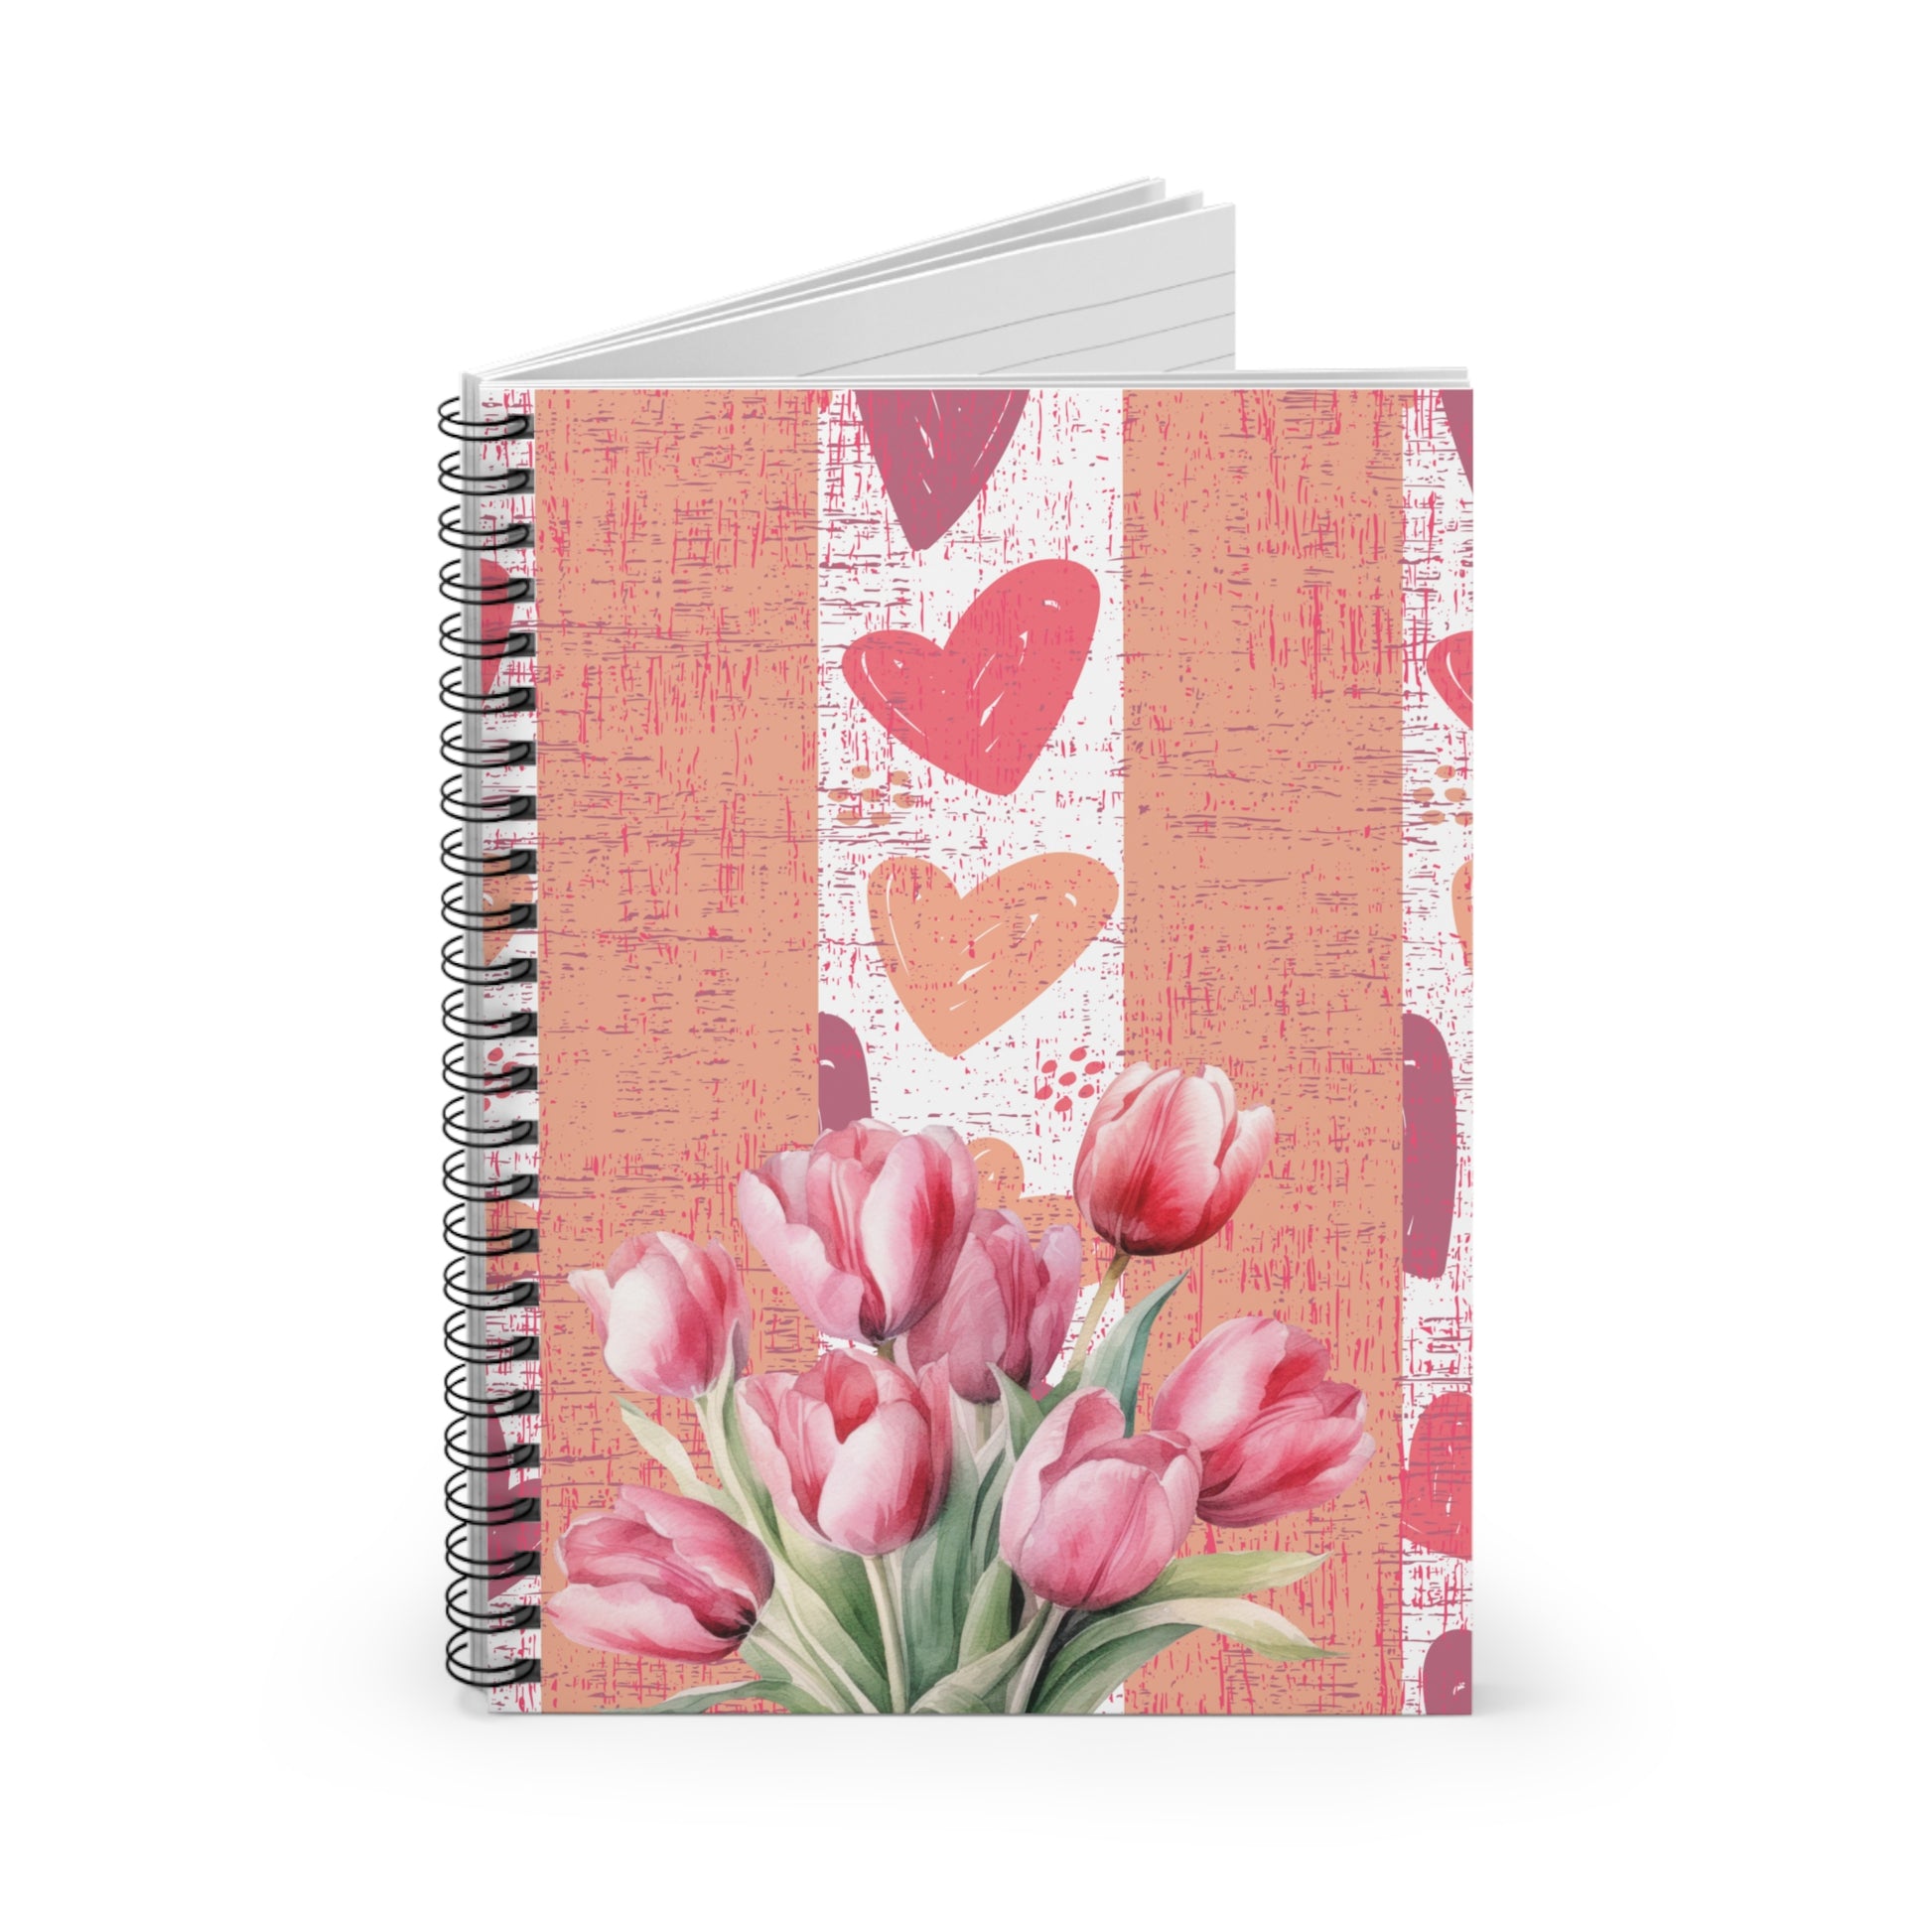 Harmony of Hearts and Tulips: Spiral Notebook for Love-Infused Reflections and Creative Expression - Eddy and Rita